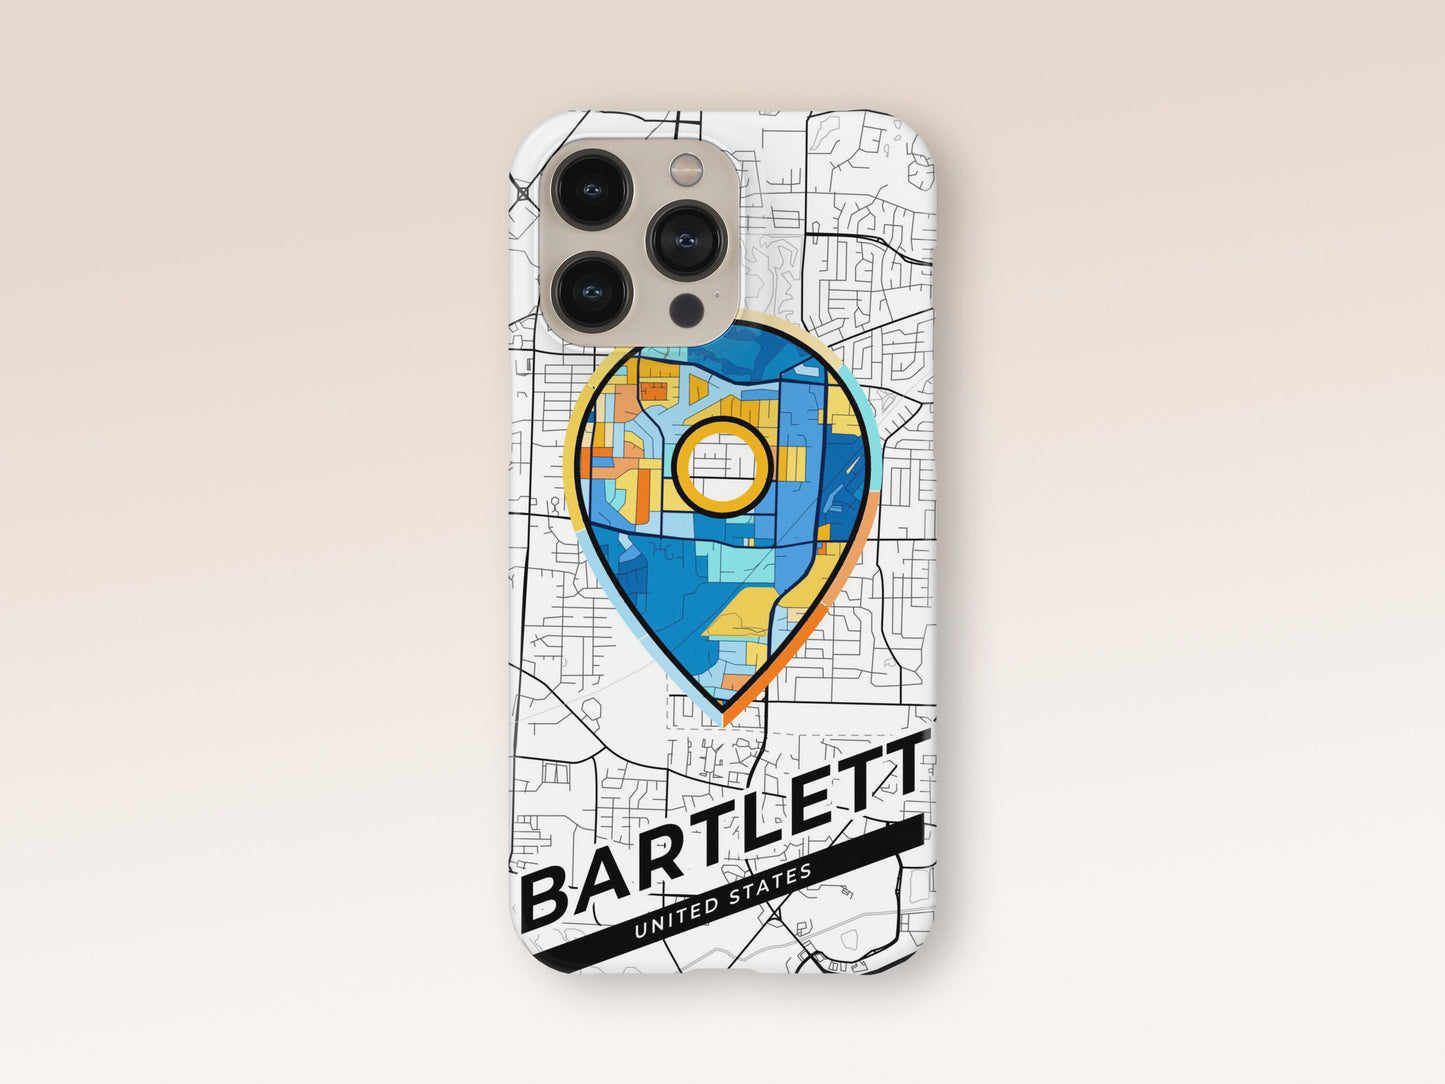 Bartlett Tennessee slim phone case with colorful icon. Birthday, wedding or housewarming gift. Couple match cases. 1